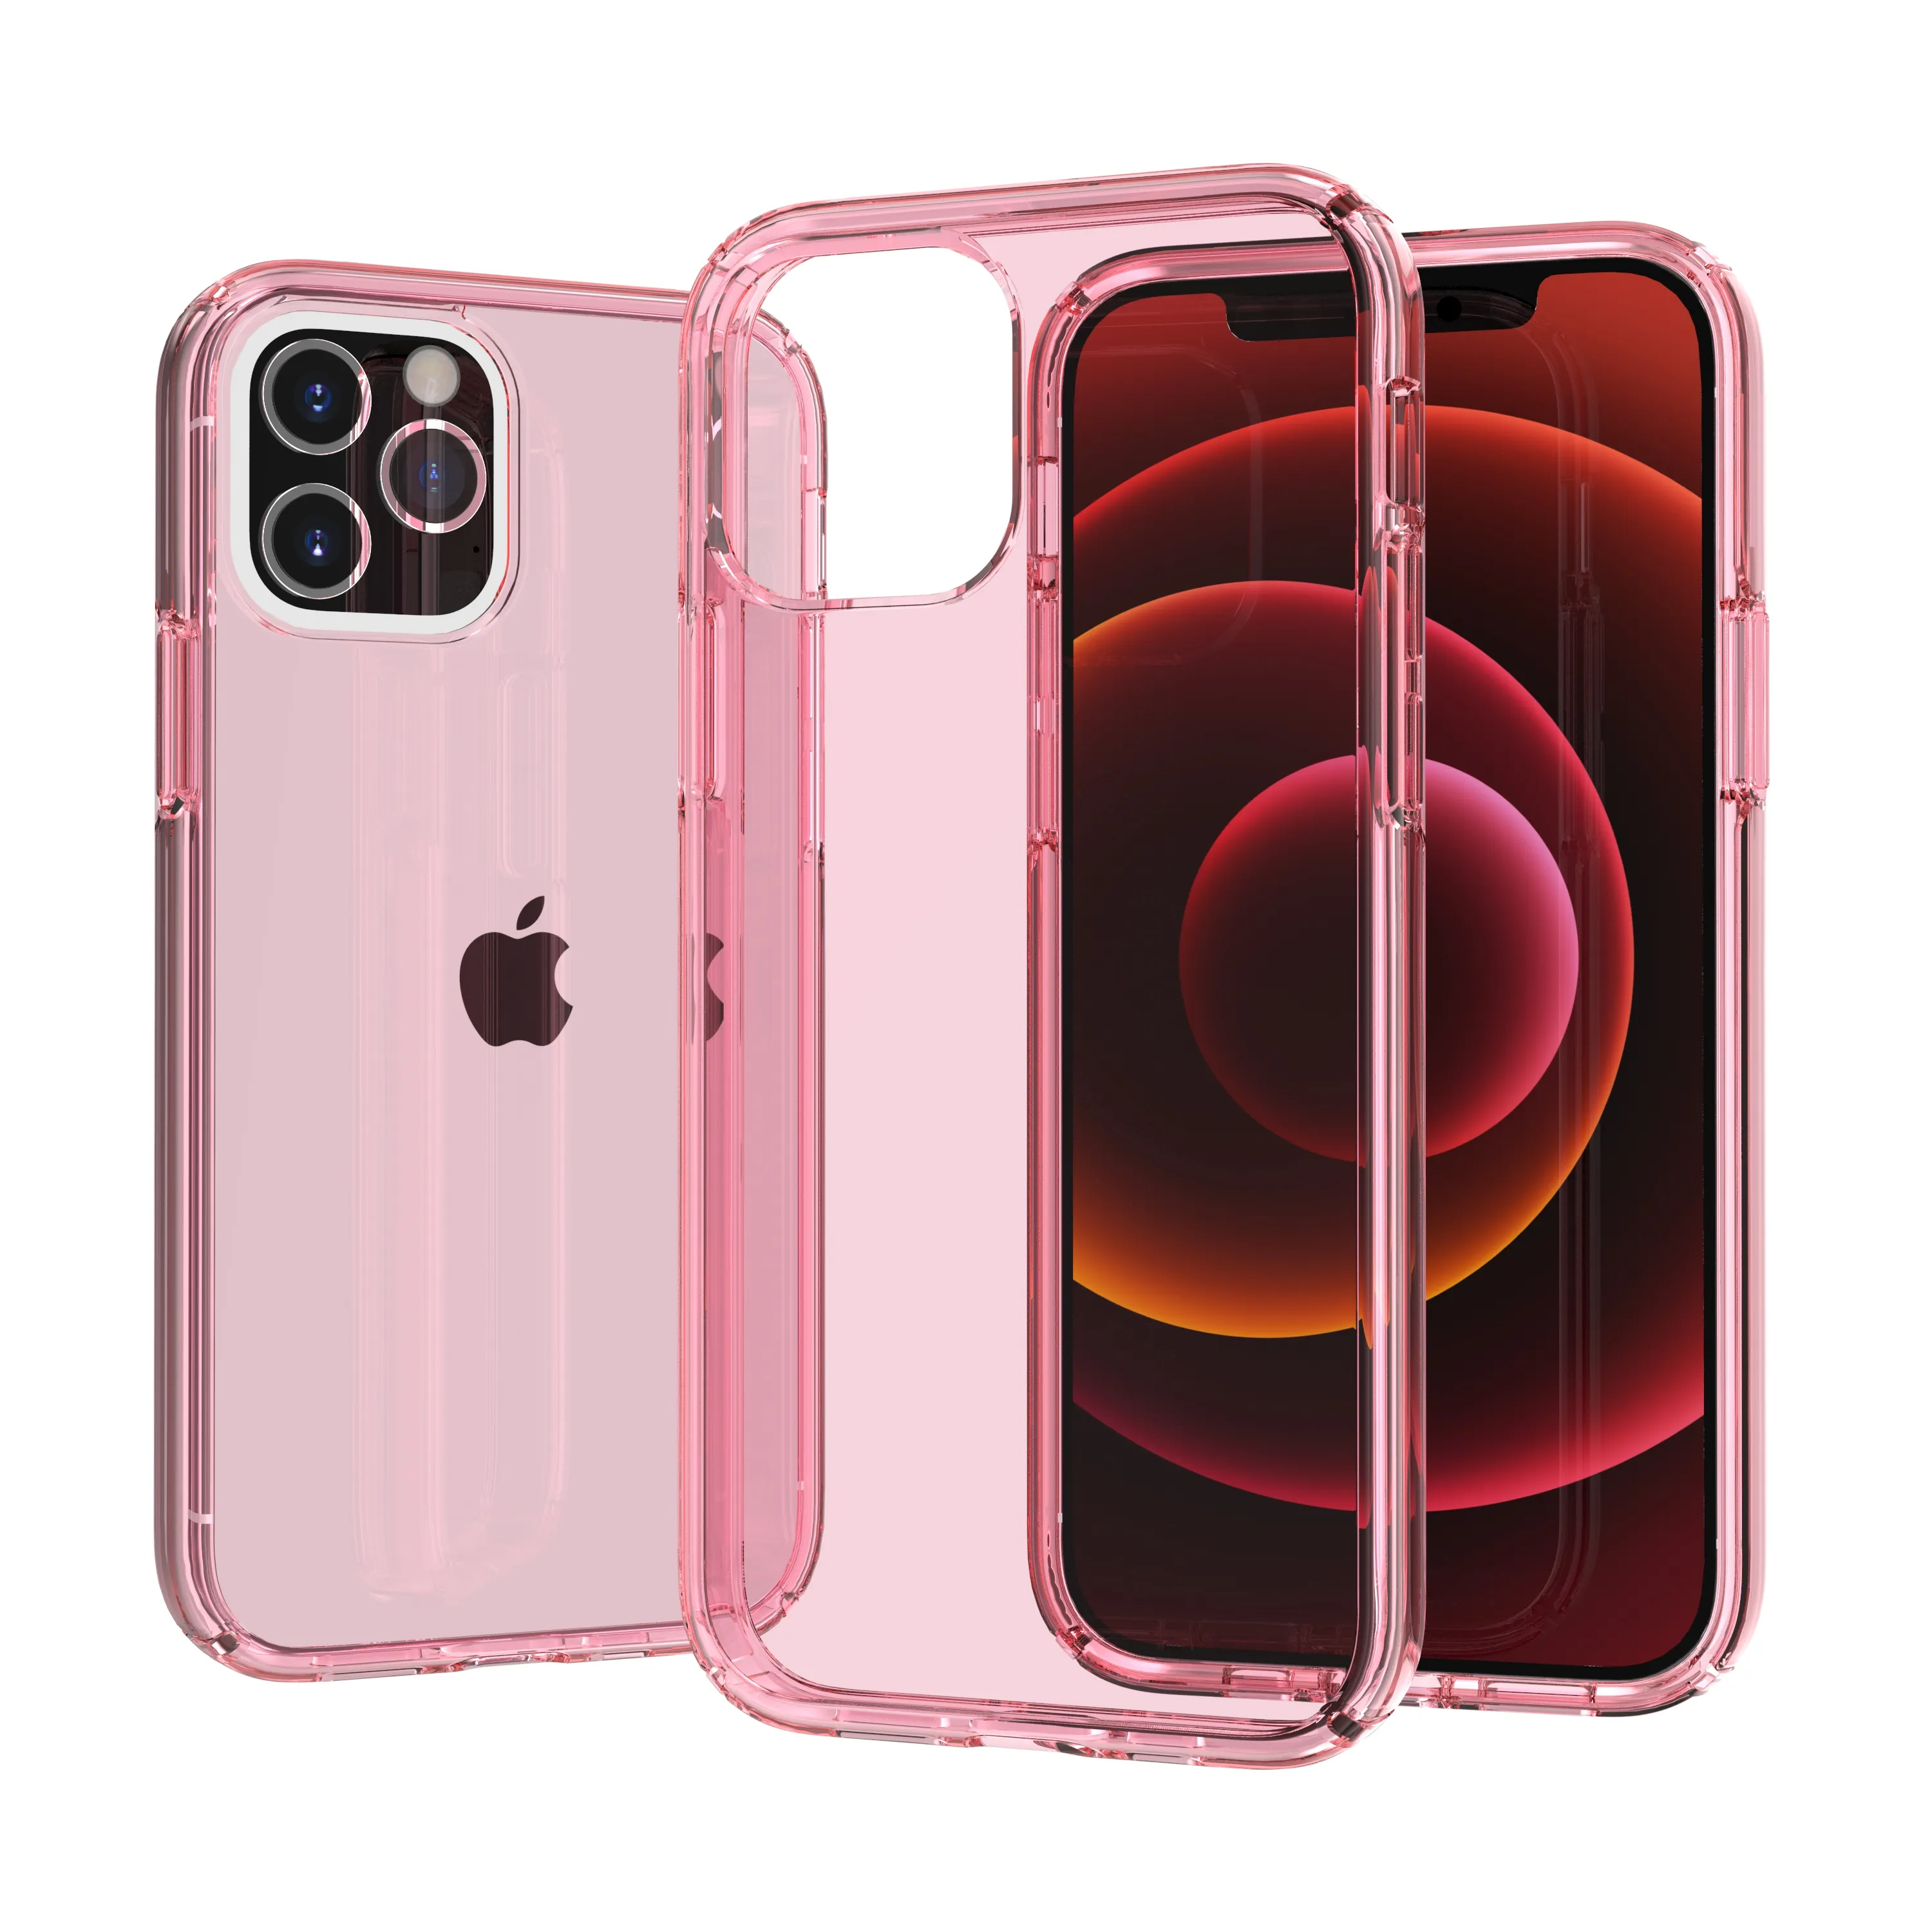 GSCASE online shopping free sample fast shipping 2021 mobile accessories cell phone covers shockproof case for iPhone 13 pro